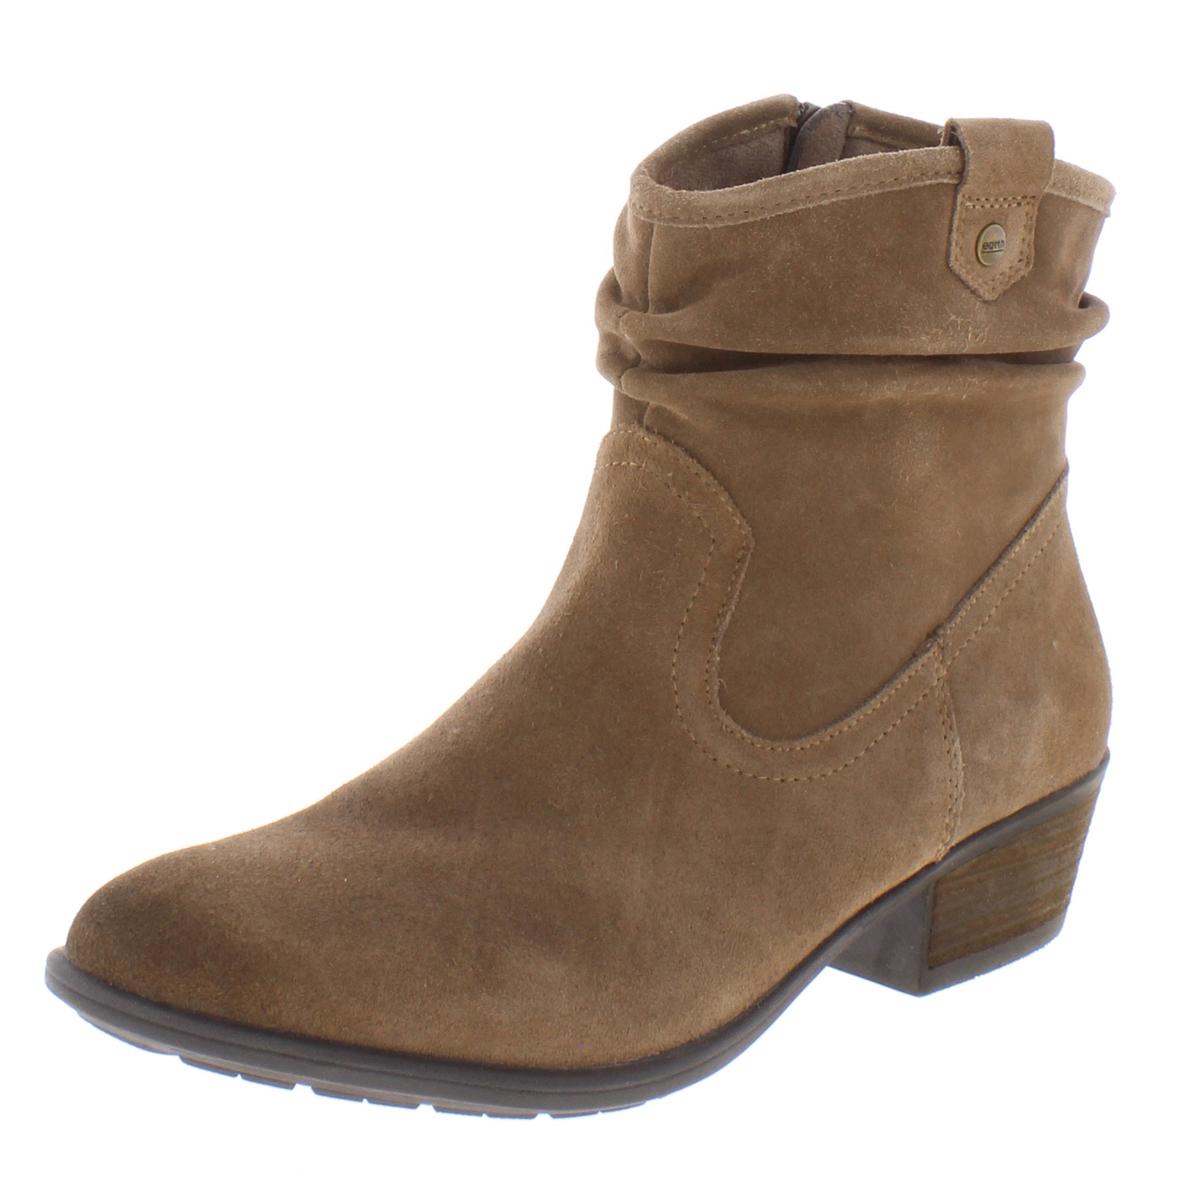 Earth Womens Peak Pioneer Taupe Ankle Boots Shoes 10 Medium (B,M) BHFO ...